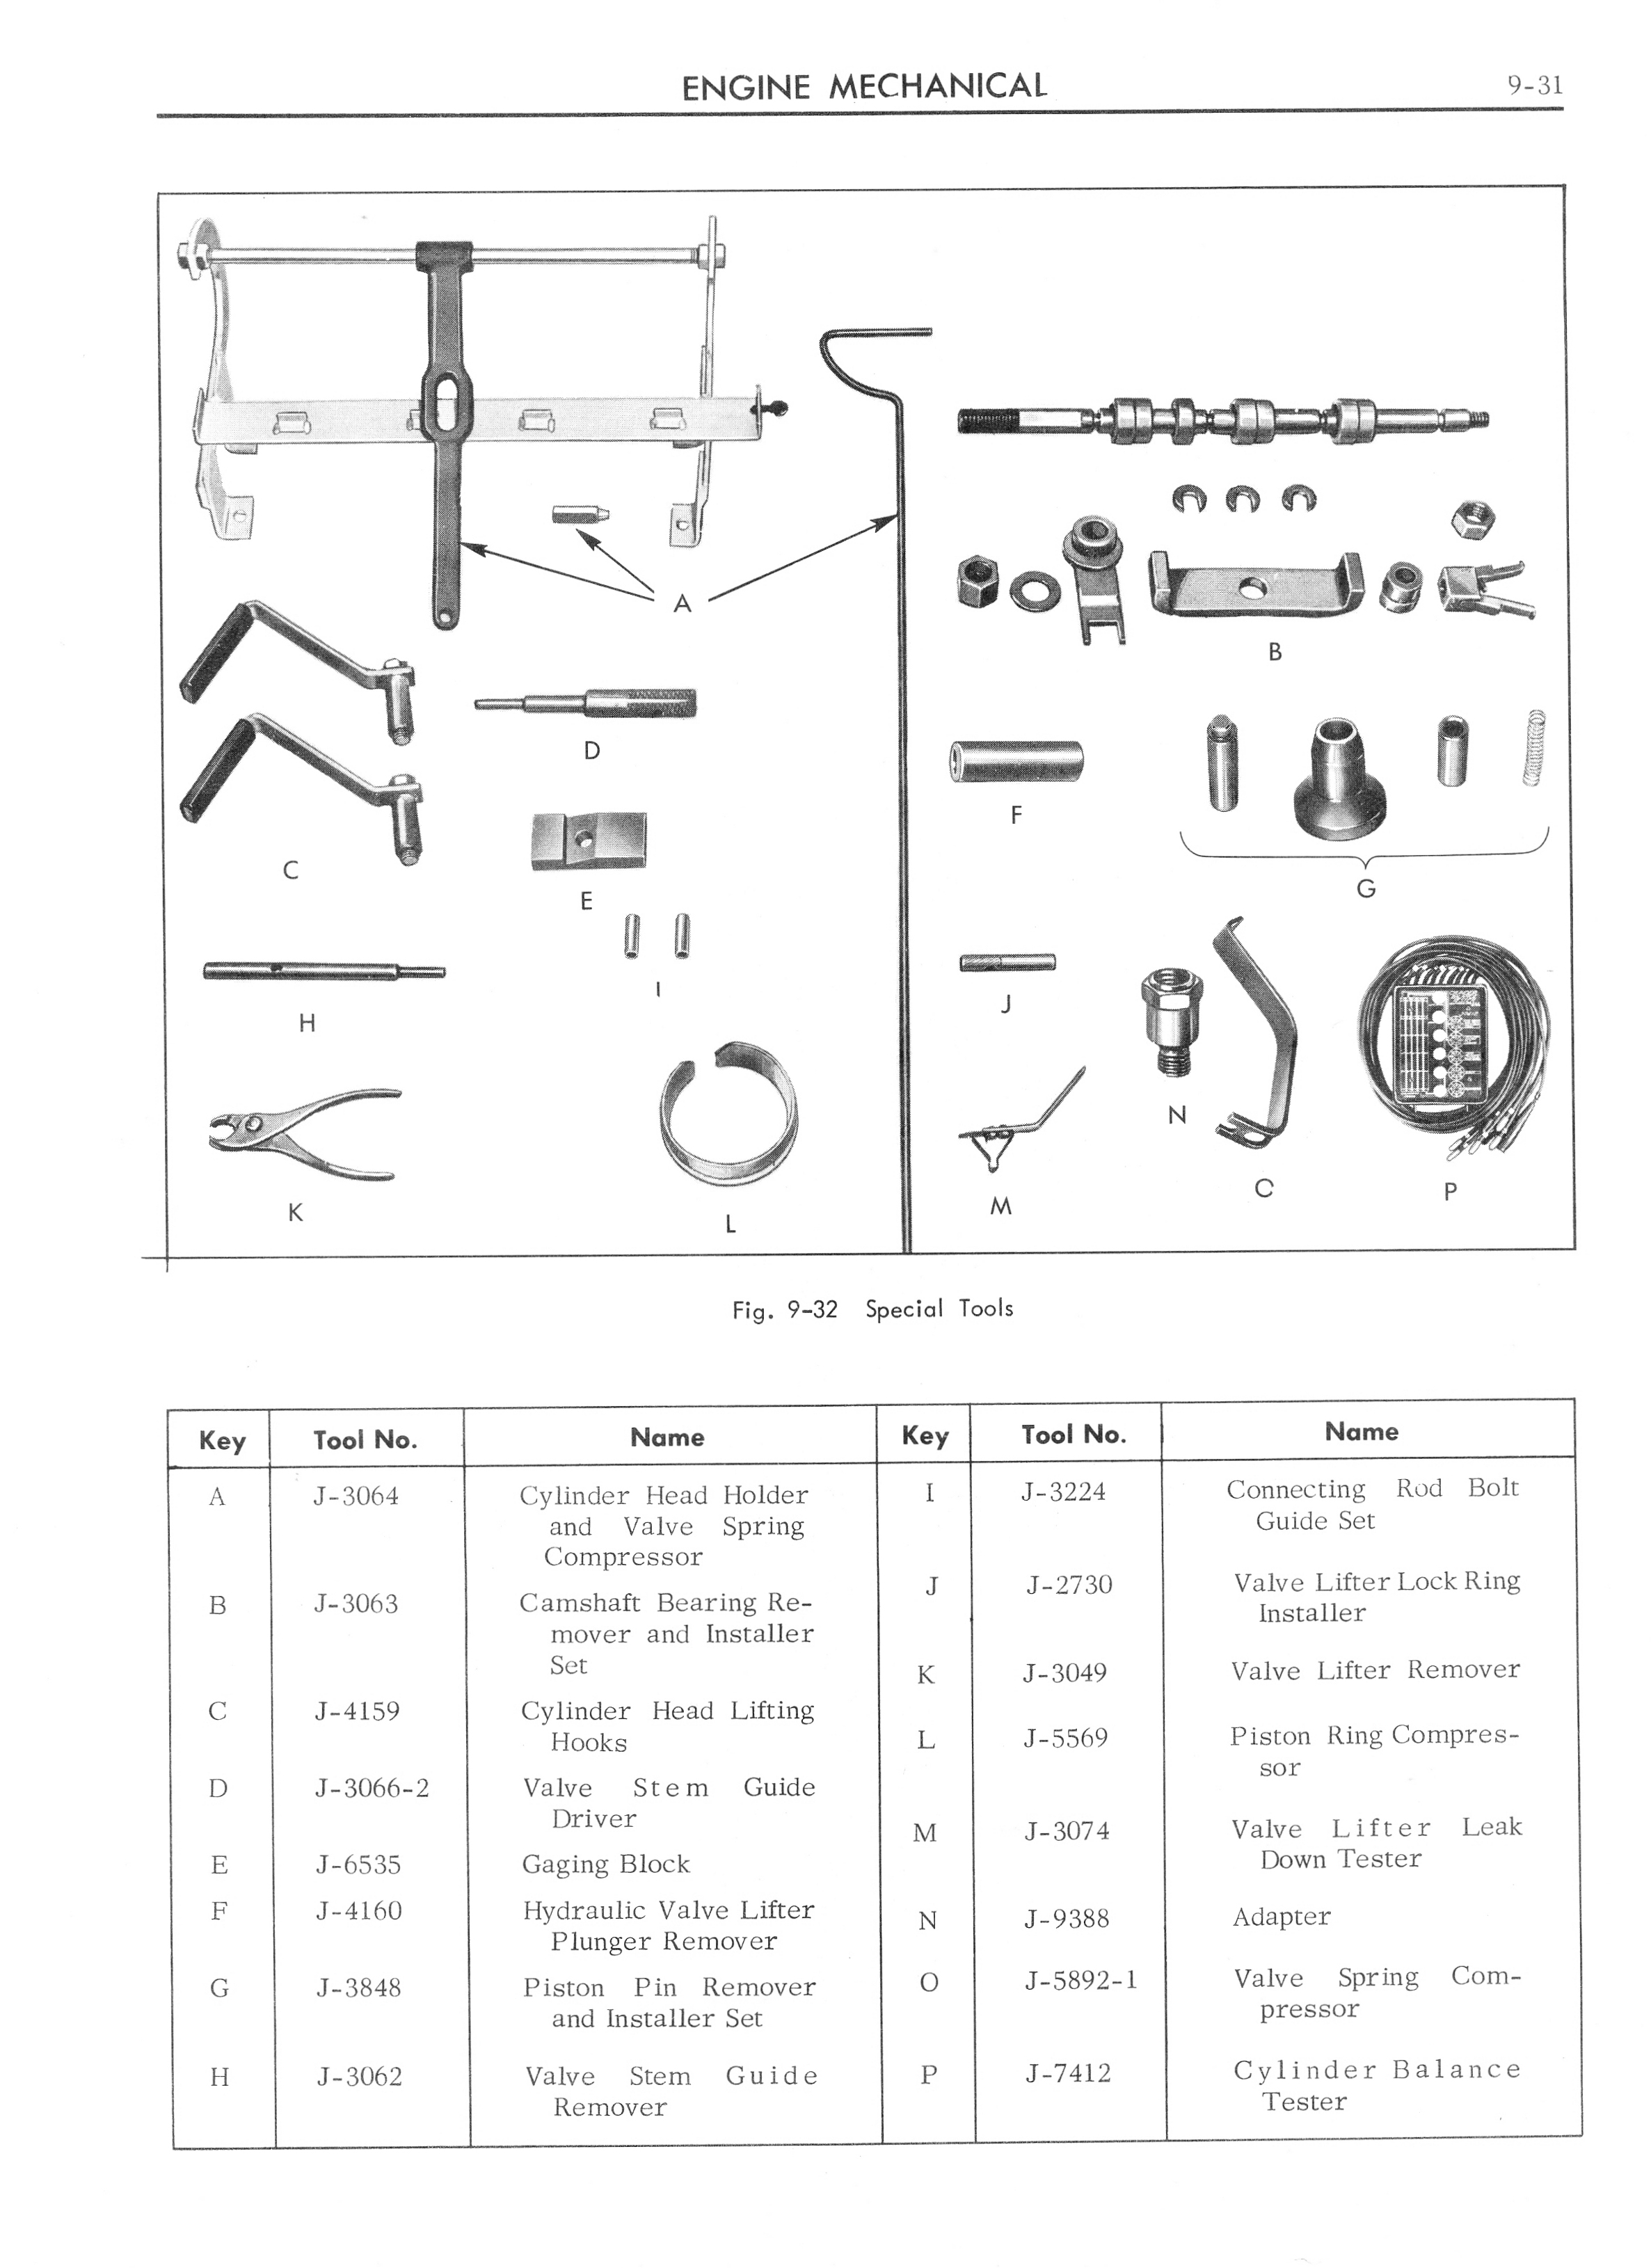 1962 Cadillac Shop Manual - Engine Mechanical Page 31 of 32